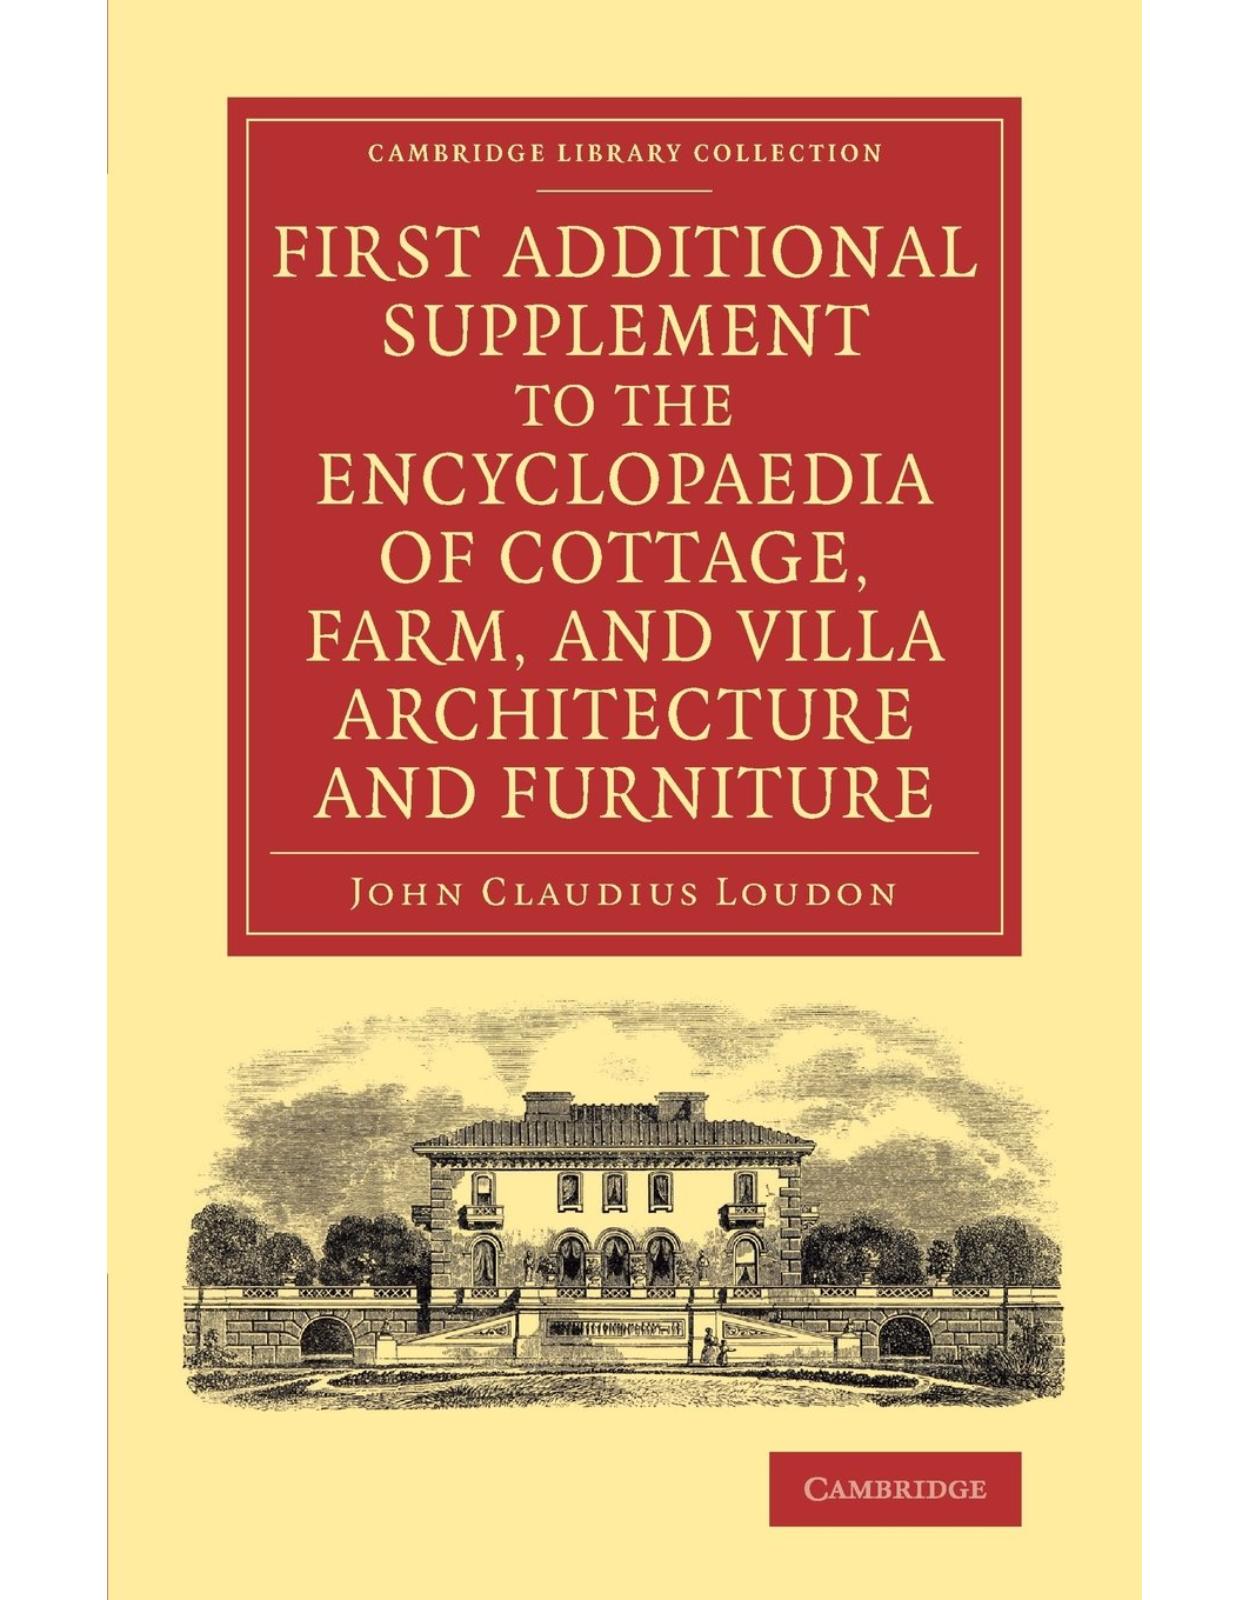 First Additional Supplement to the Encyclopaedia of Cottage, Farm, and Villa Architecture and Furniture: Bringing the Work Down to 1842 (Cambridge Library Collection - Art and Architecture) 